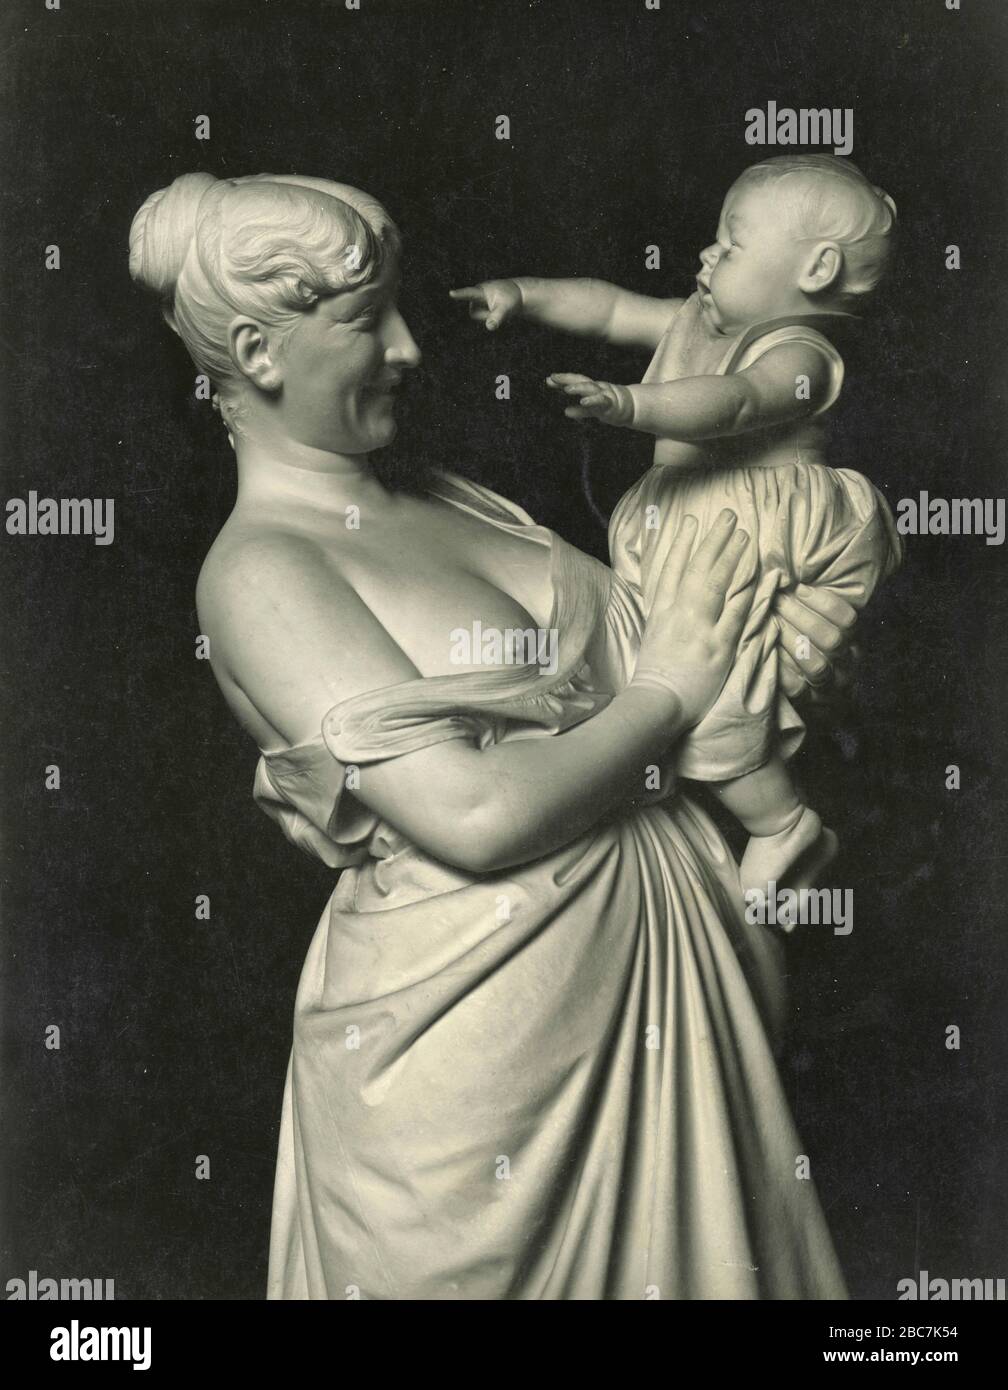 The Mother, sculpture by Italian artist A. Cecioni, Modern Art Gallery, Rome, Italy 1920s Stock Photo